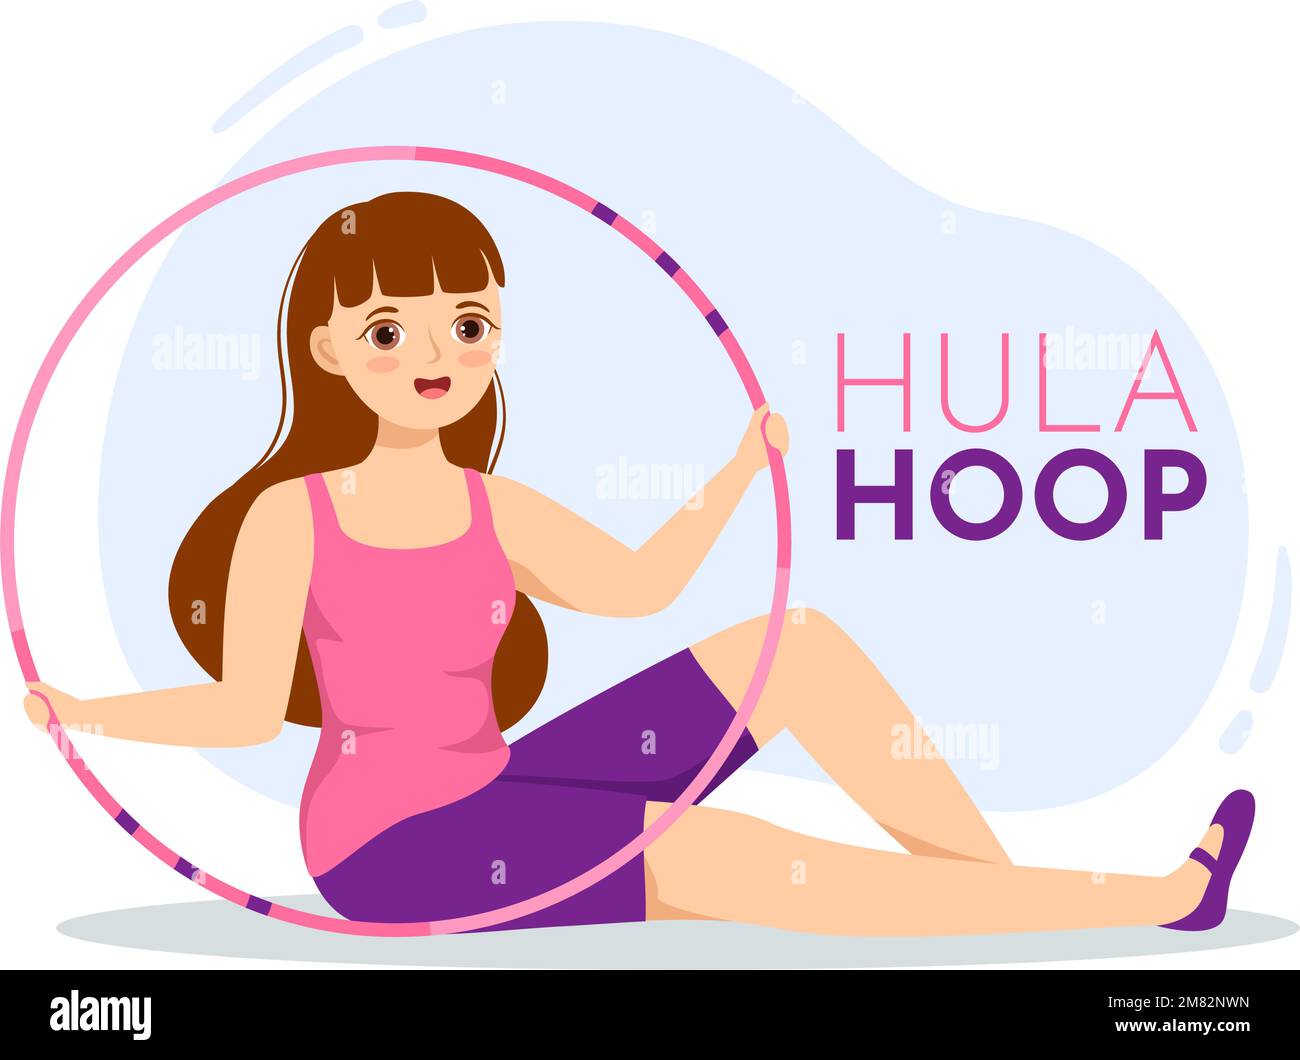 Hula Hoop Illustration with People Exercising Playing Hula Hoops and Fitness Training in Sports Activity Flat Cartoon Hand Drawn Templates Stock Vector